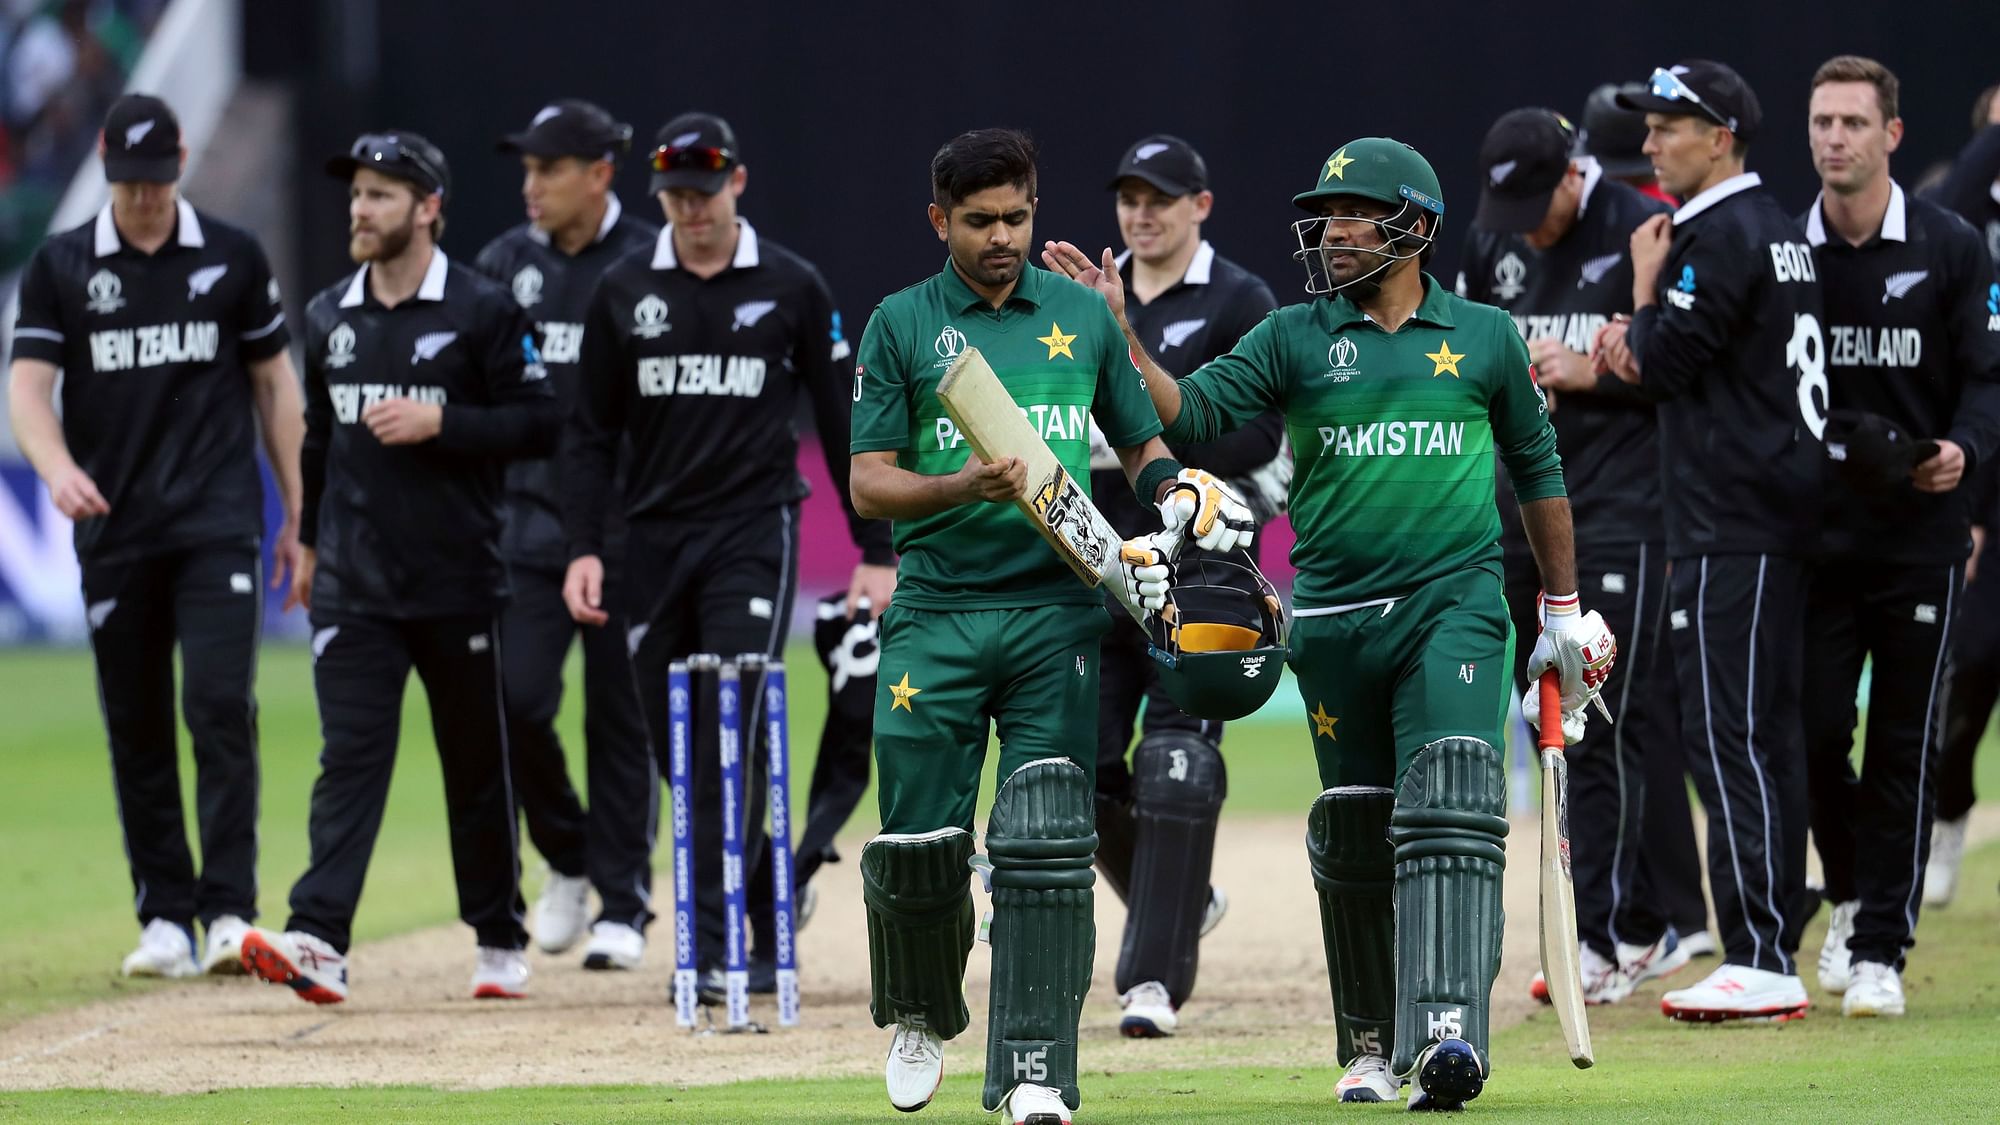 Pakistan’s captain Sarfaraz Ahmed, right, pat on the shoulder, teammate Babar Azam for scoring a century at the end the Cricket World Cup match between New Zealand and Pakistan.